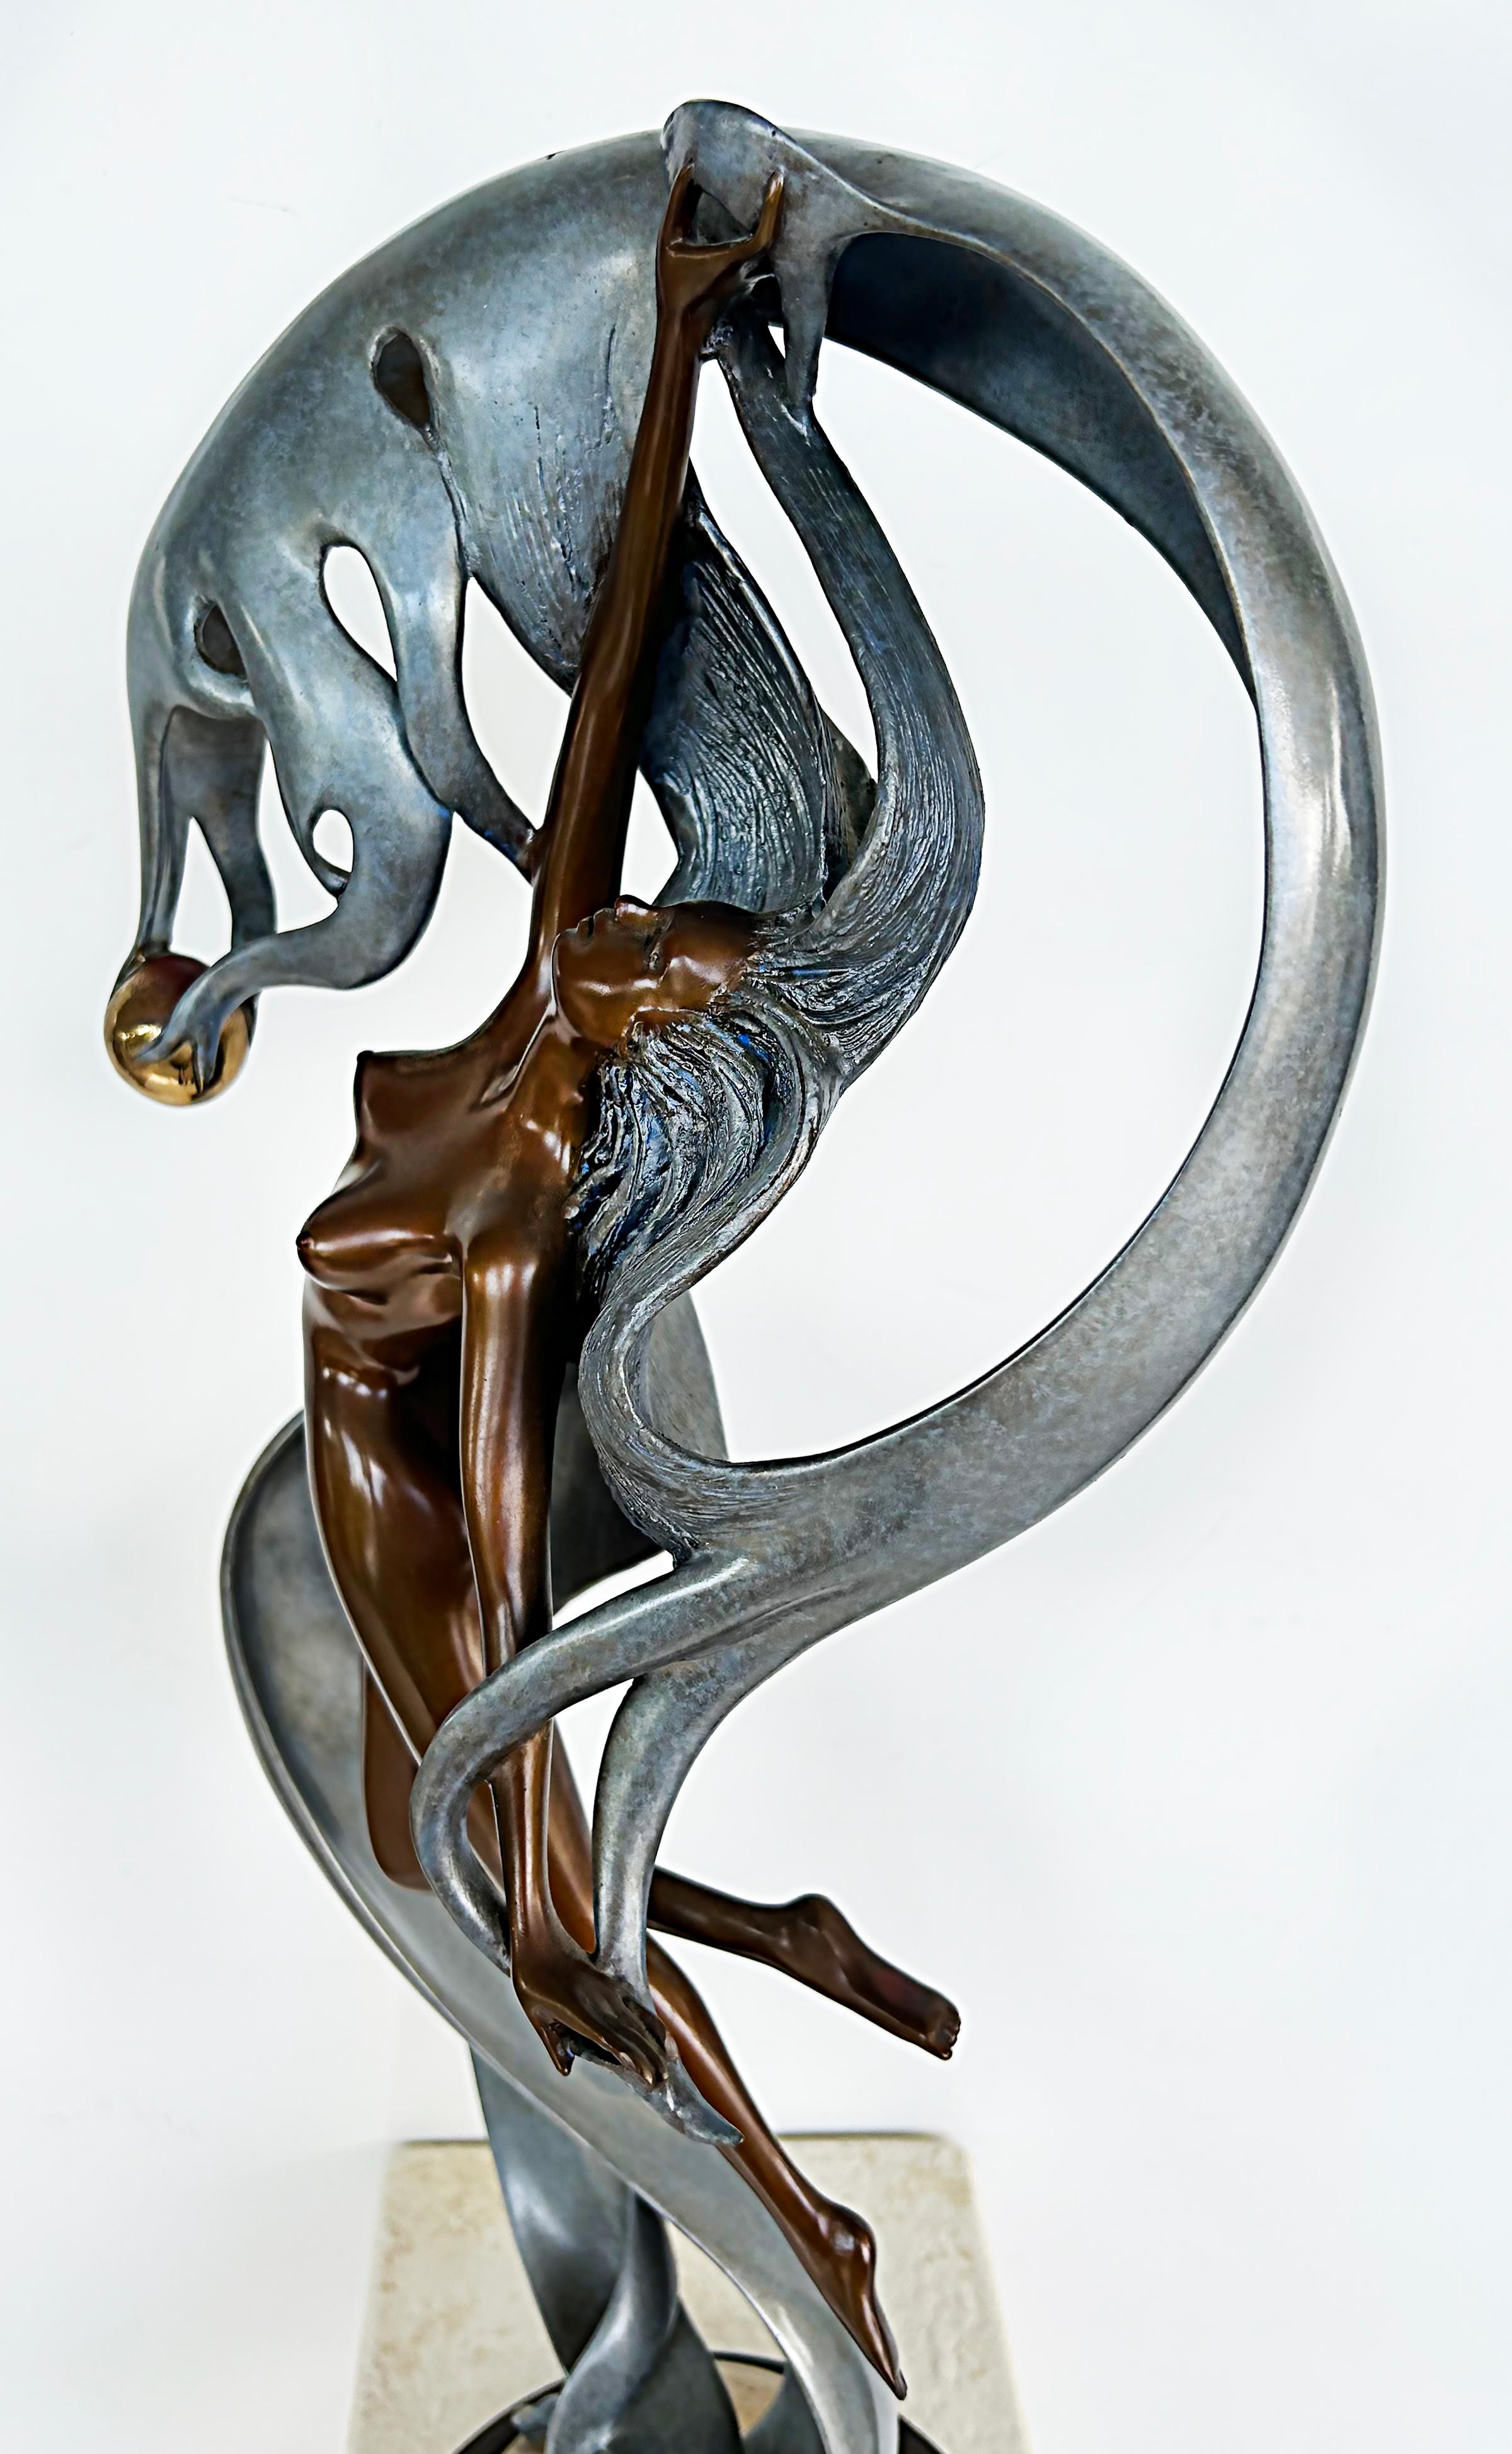 Angelo Basso Perla bronze sculpture signed, Numbered 124/175 

Offered for sale is a bronze sculpture titled 